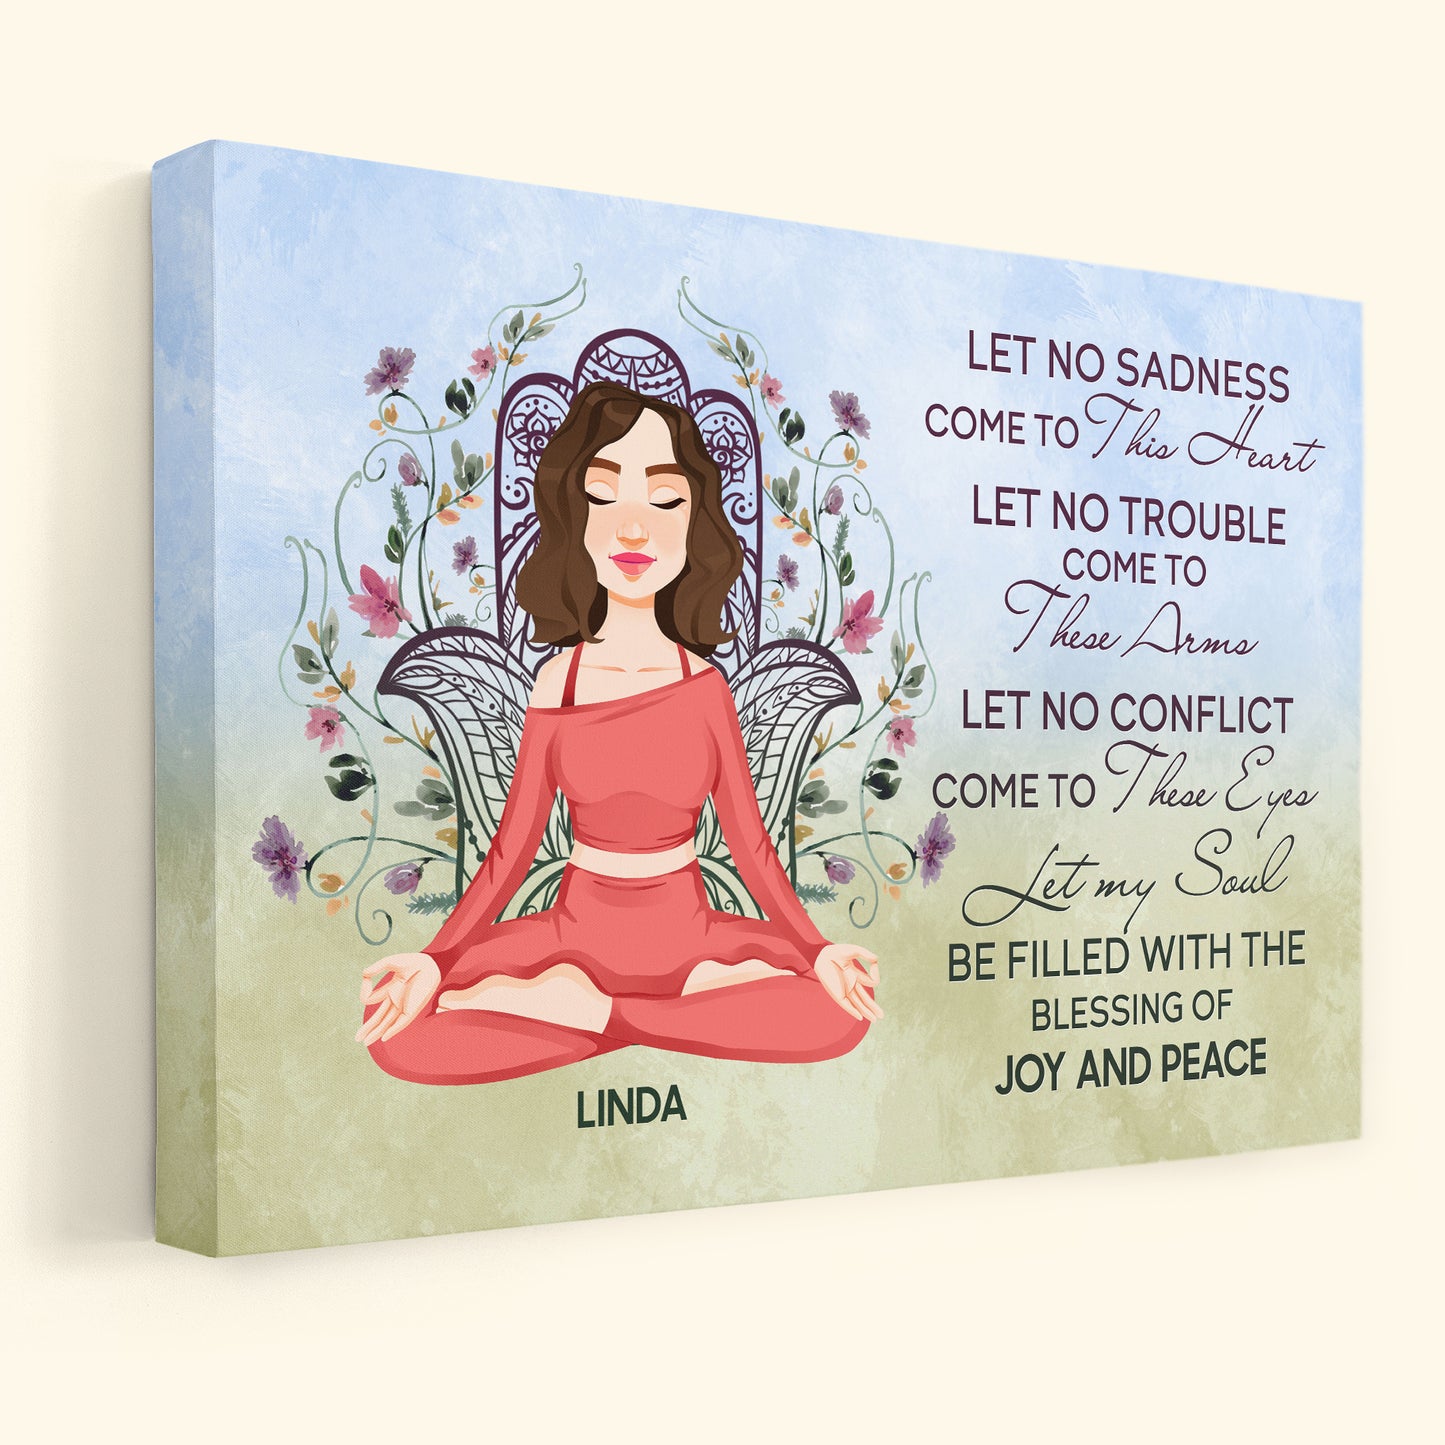 The Blessing Of Joy And Peace - Personalized Wrapped Canvas